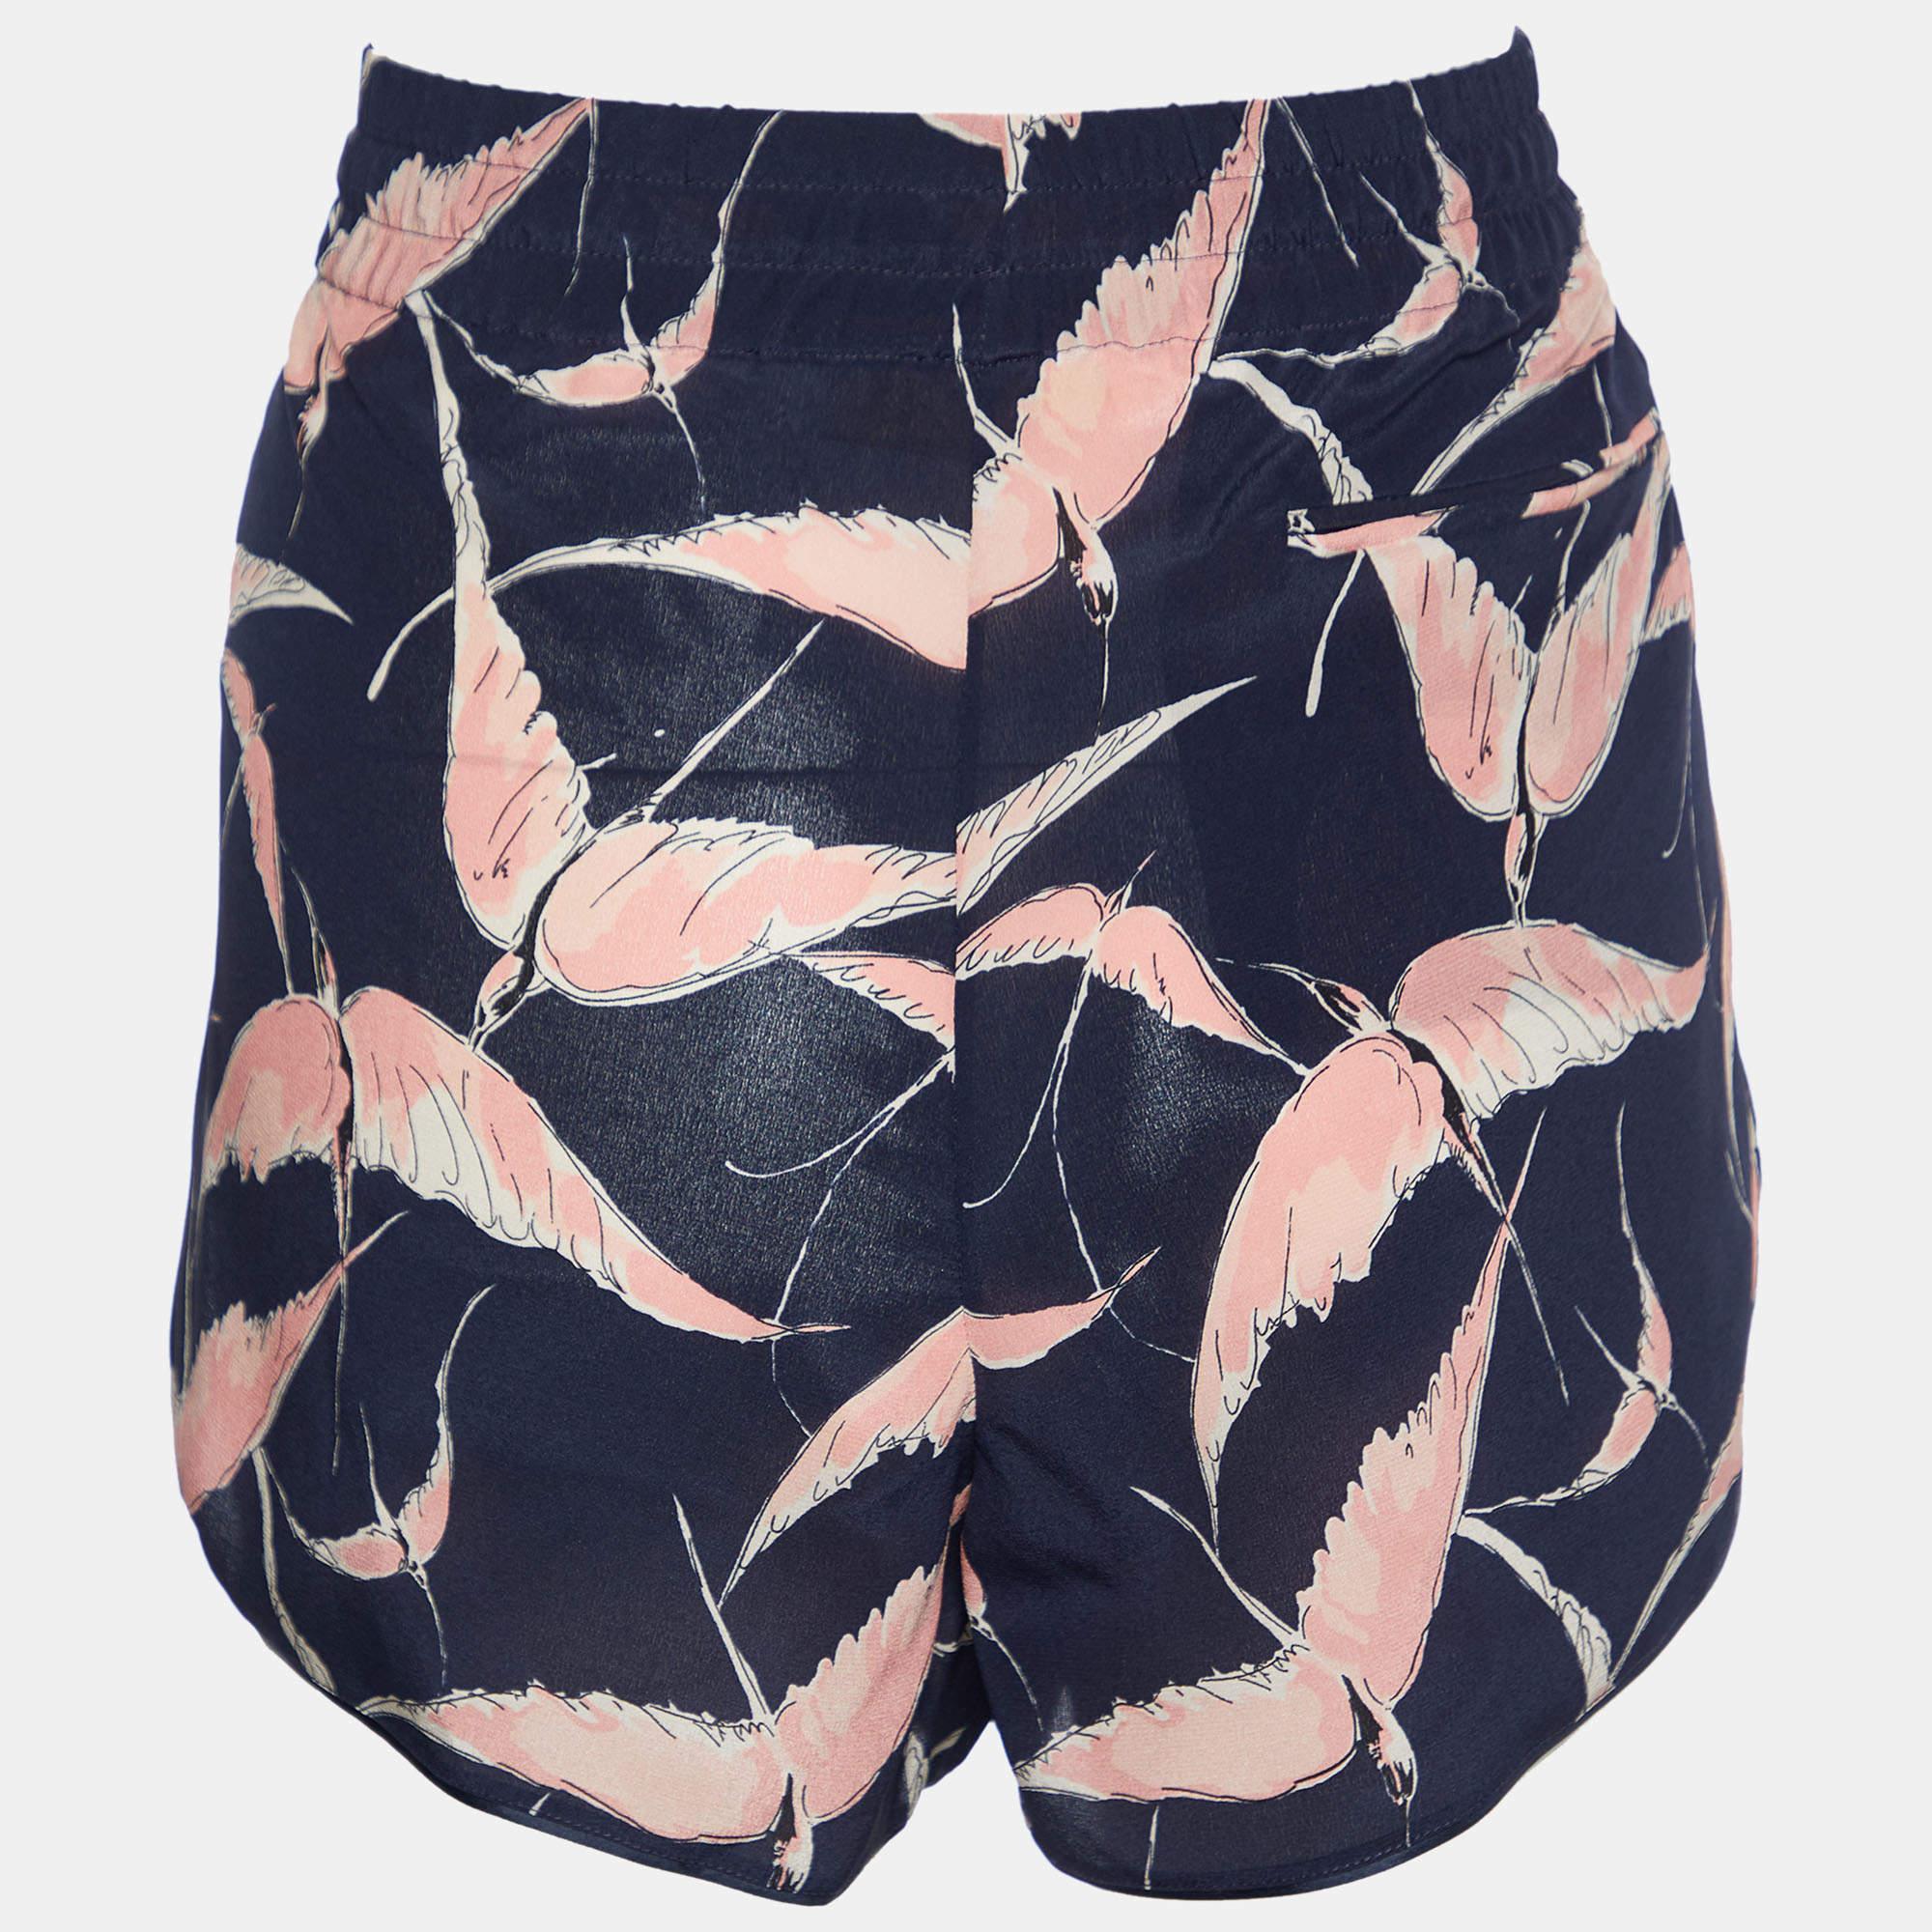 Beachy vacations call for a stylish pair of shorts like this. Stitched using high-quality fabric, this pair of shorts is styled with classic details and has a superb length. Wear it with T-shirts.

